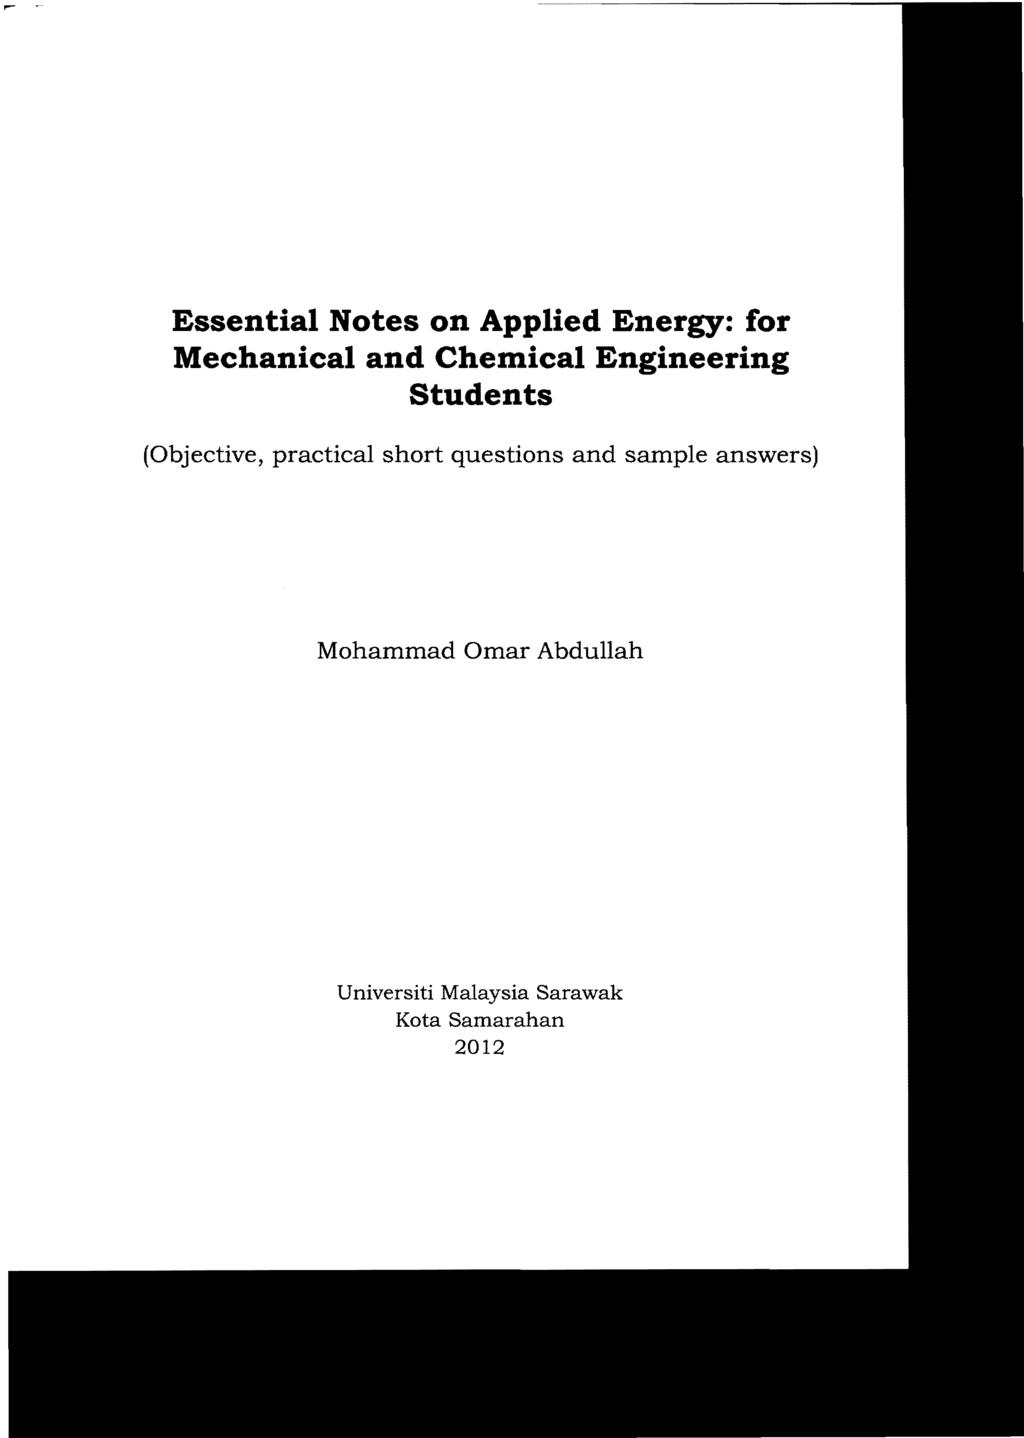 Essential Notes on Applied Energy: for Mechanical and Chemical Engineering Students (Objective, practical